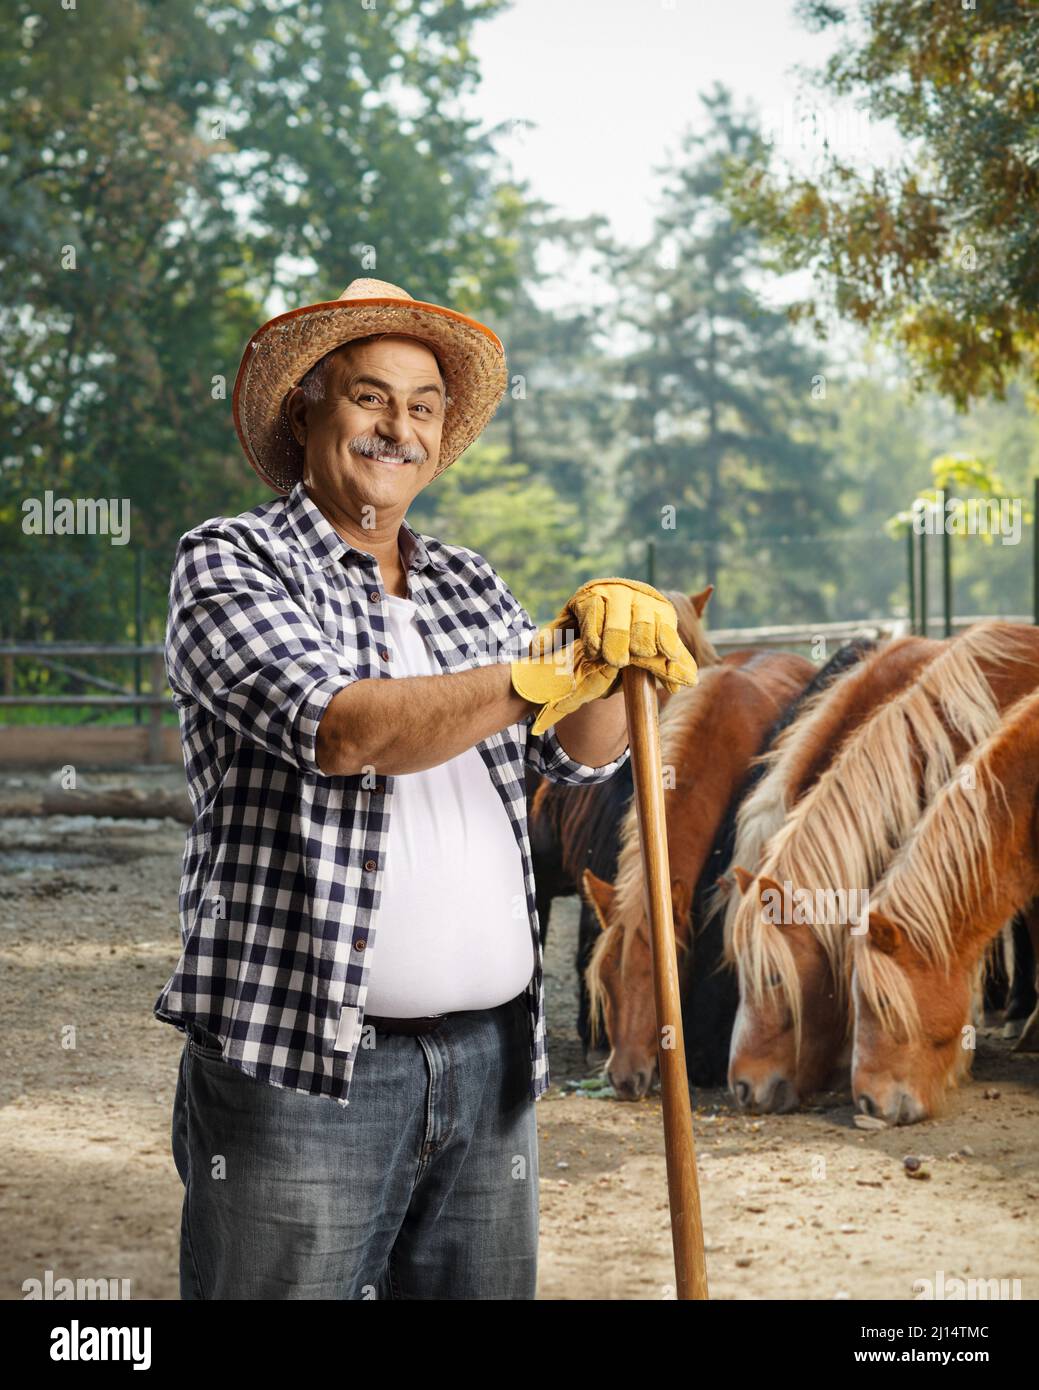 Mature farmer with a straw hat standing on a stud farm Stock Photo